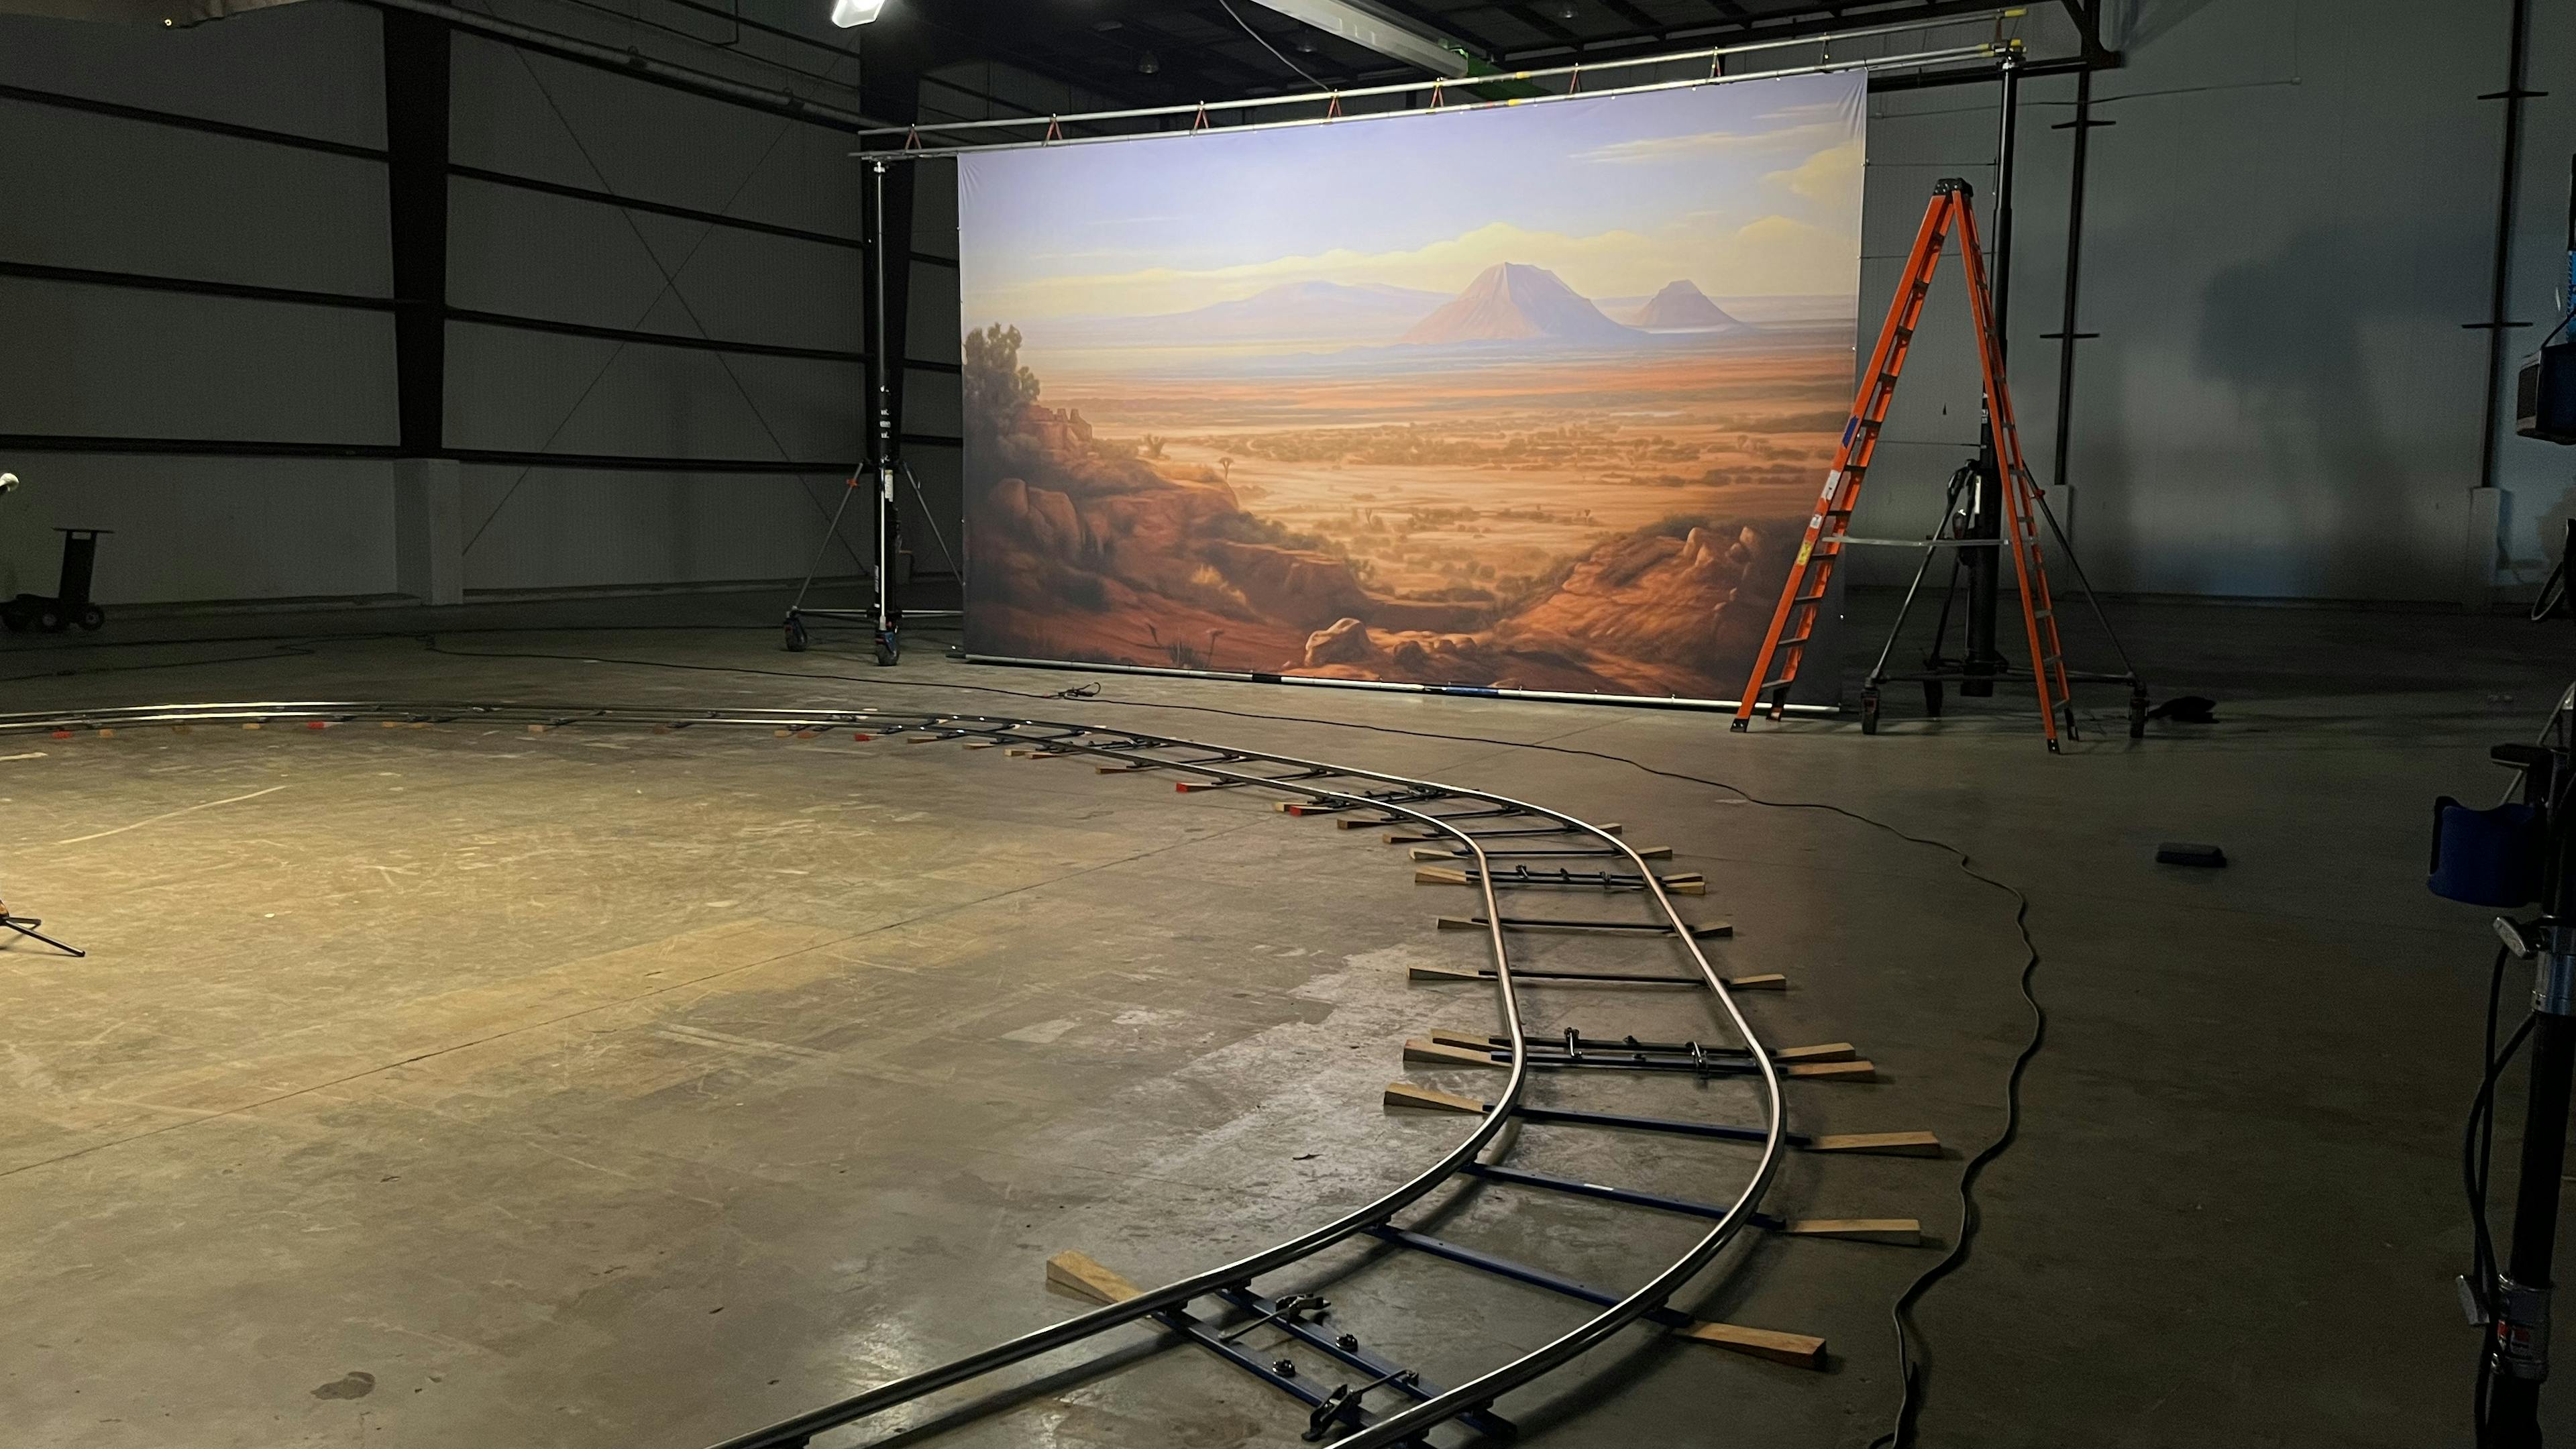 Small train tracks run through a studio with a backdrop of the desert